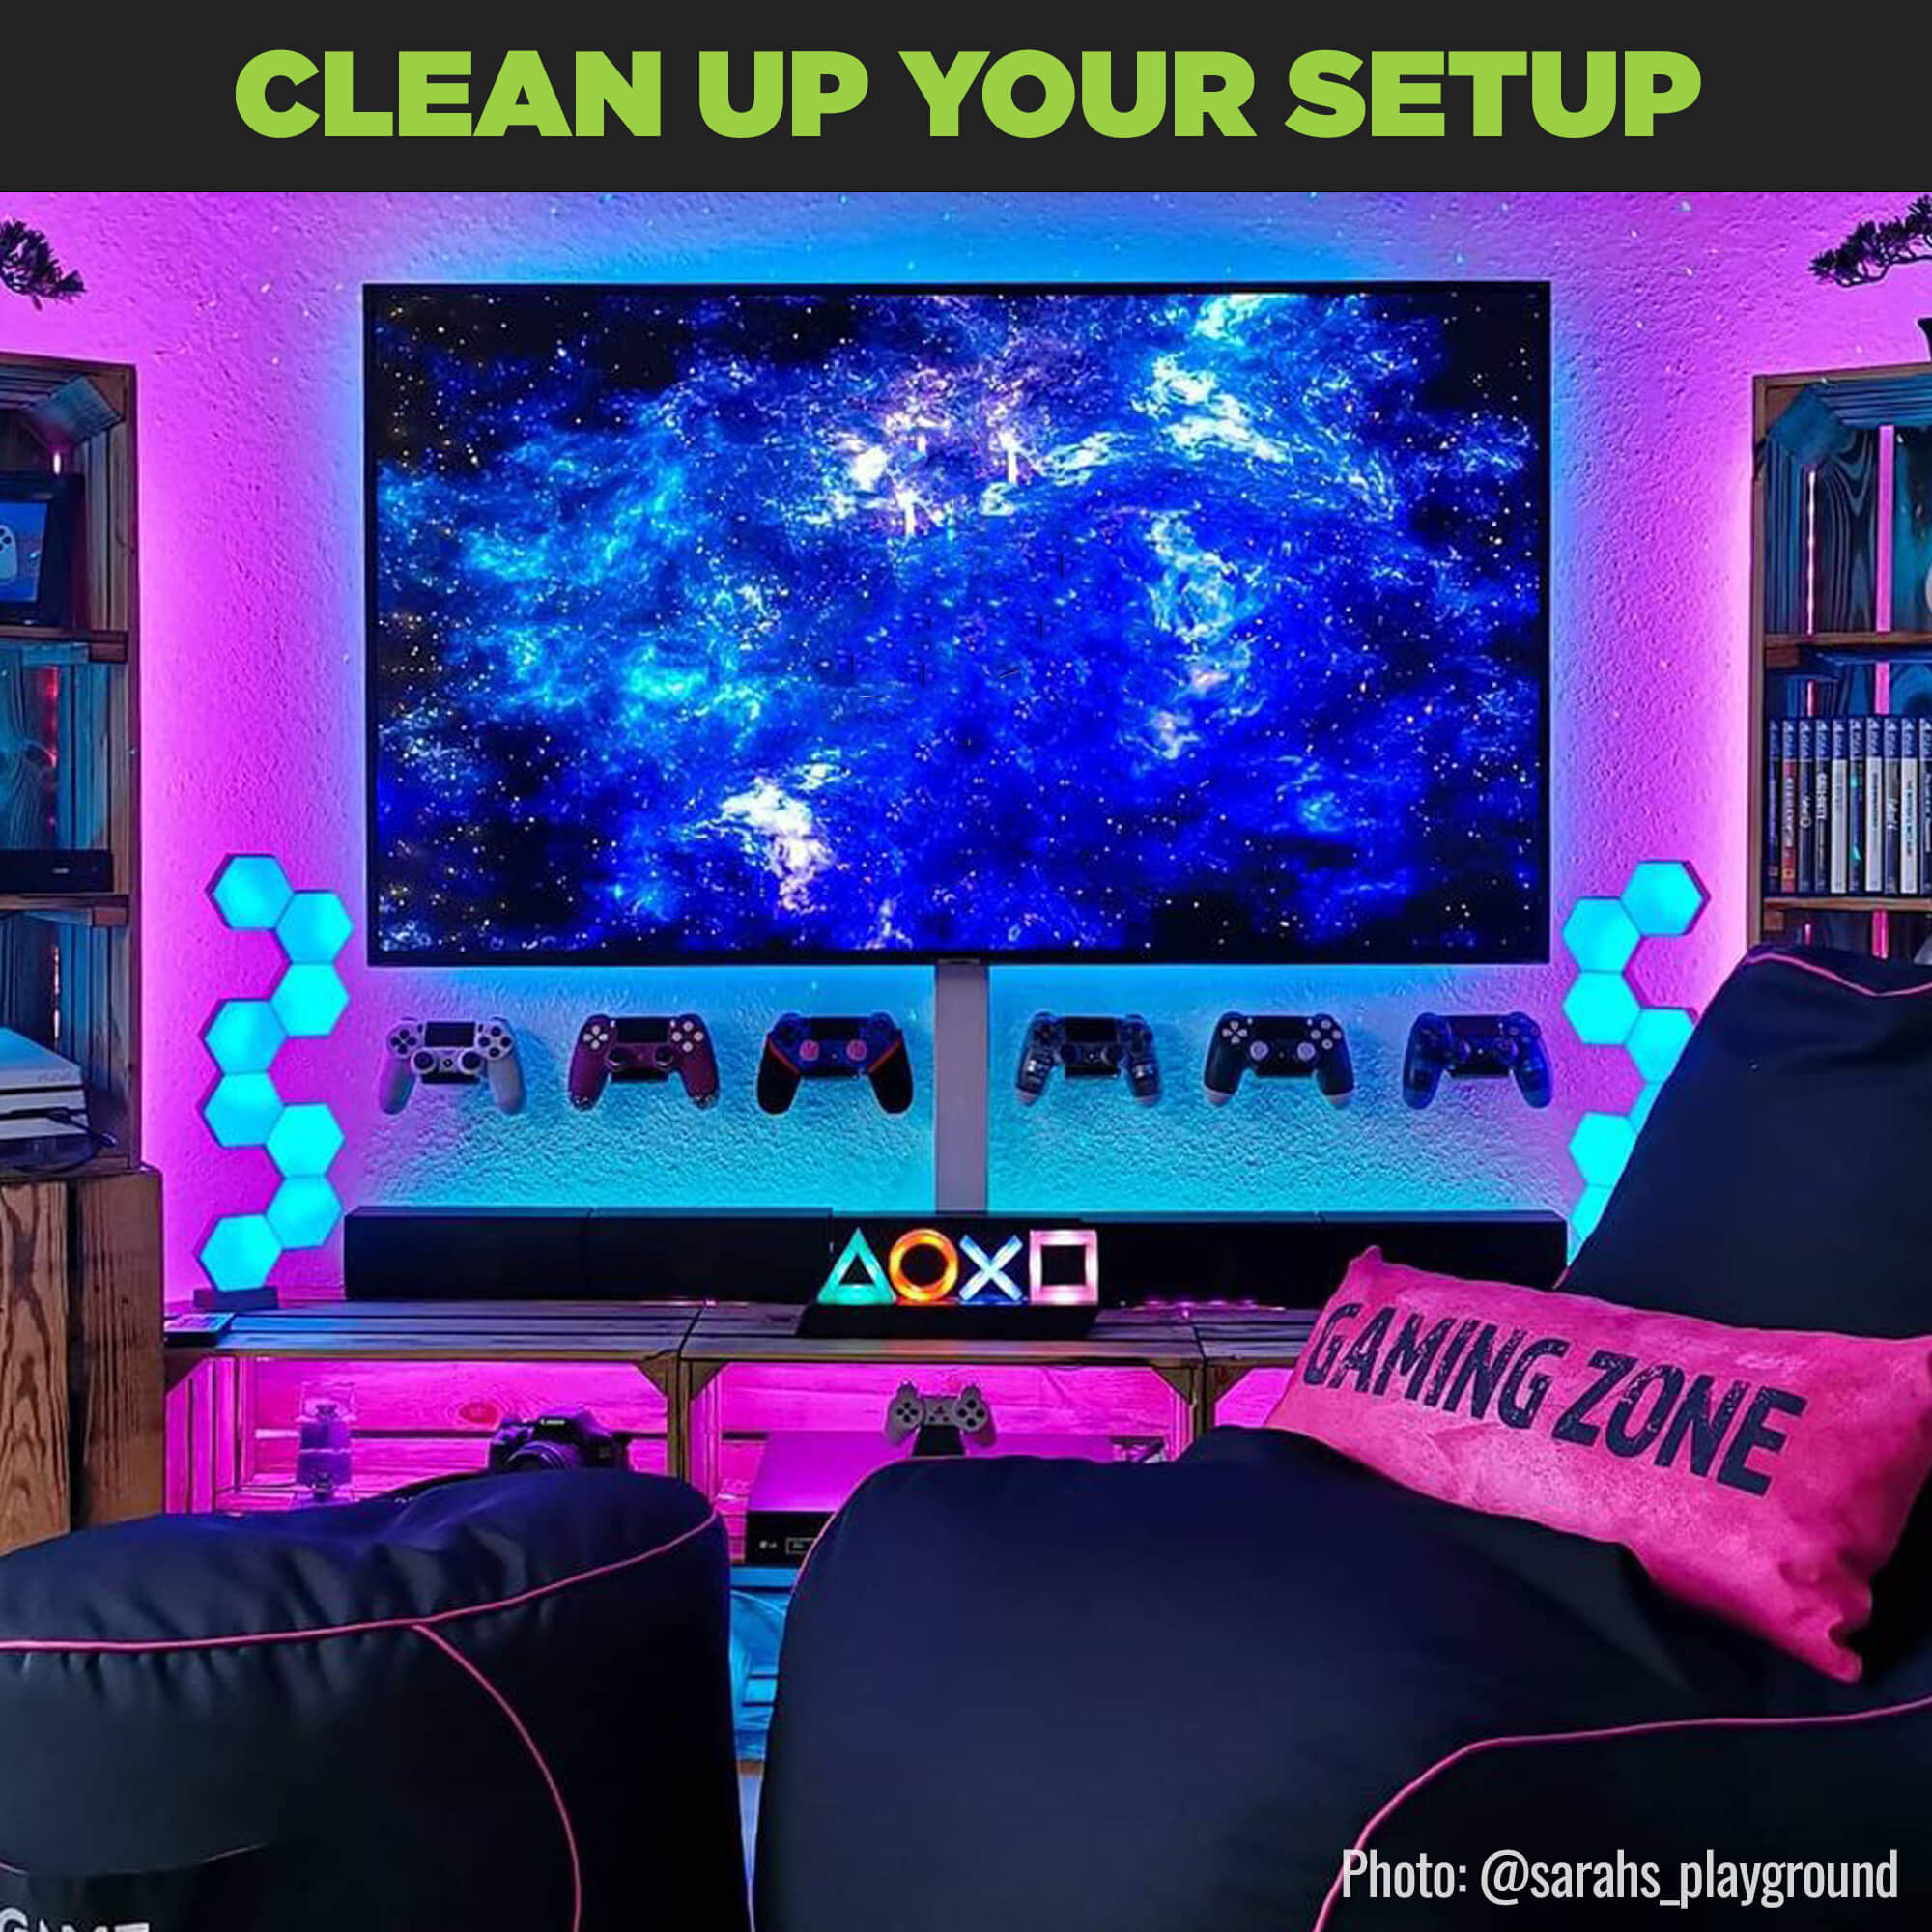 Game room setup displaying PlayStation controllers using HIDEit Uni-C Controller Mounts.